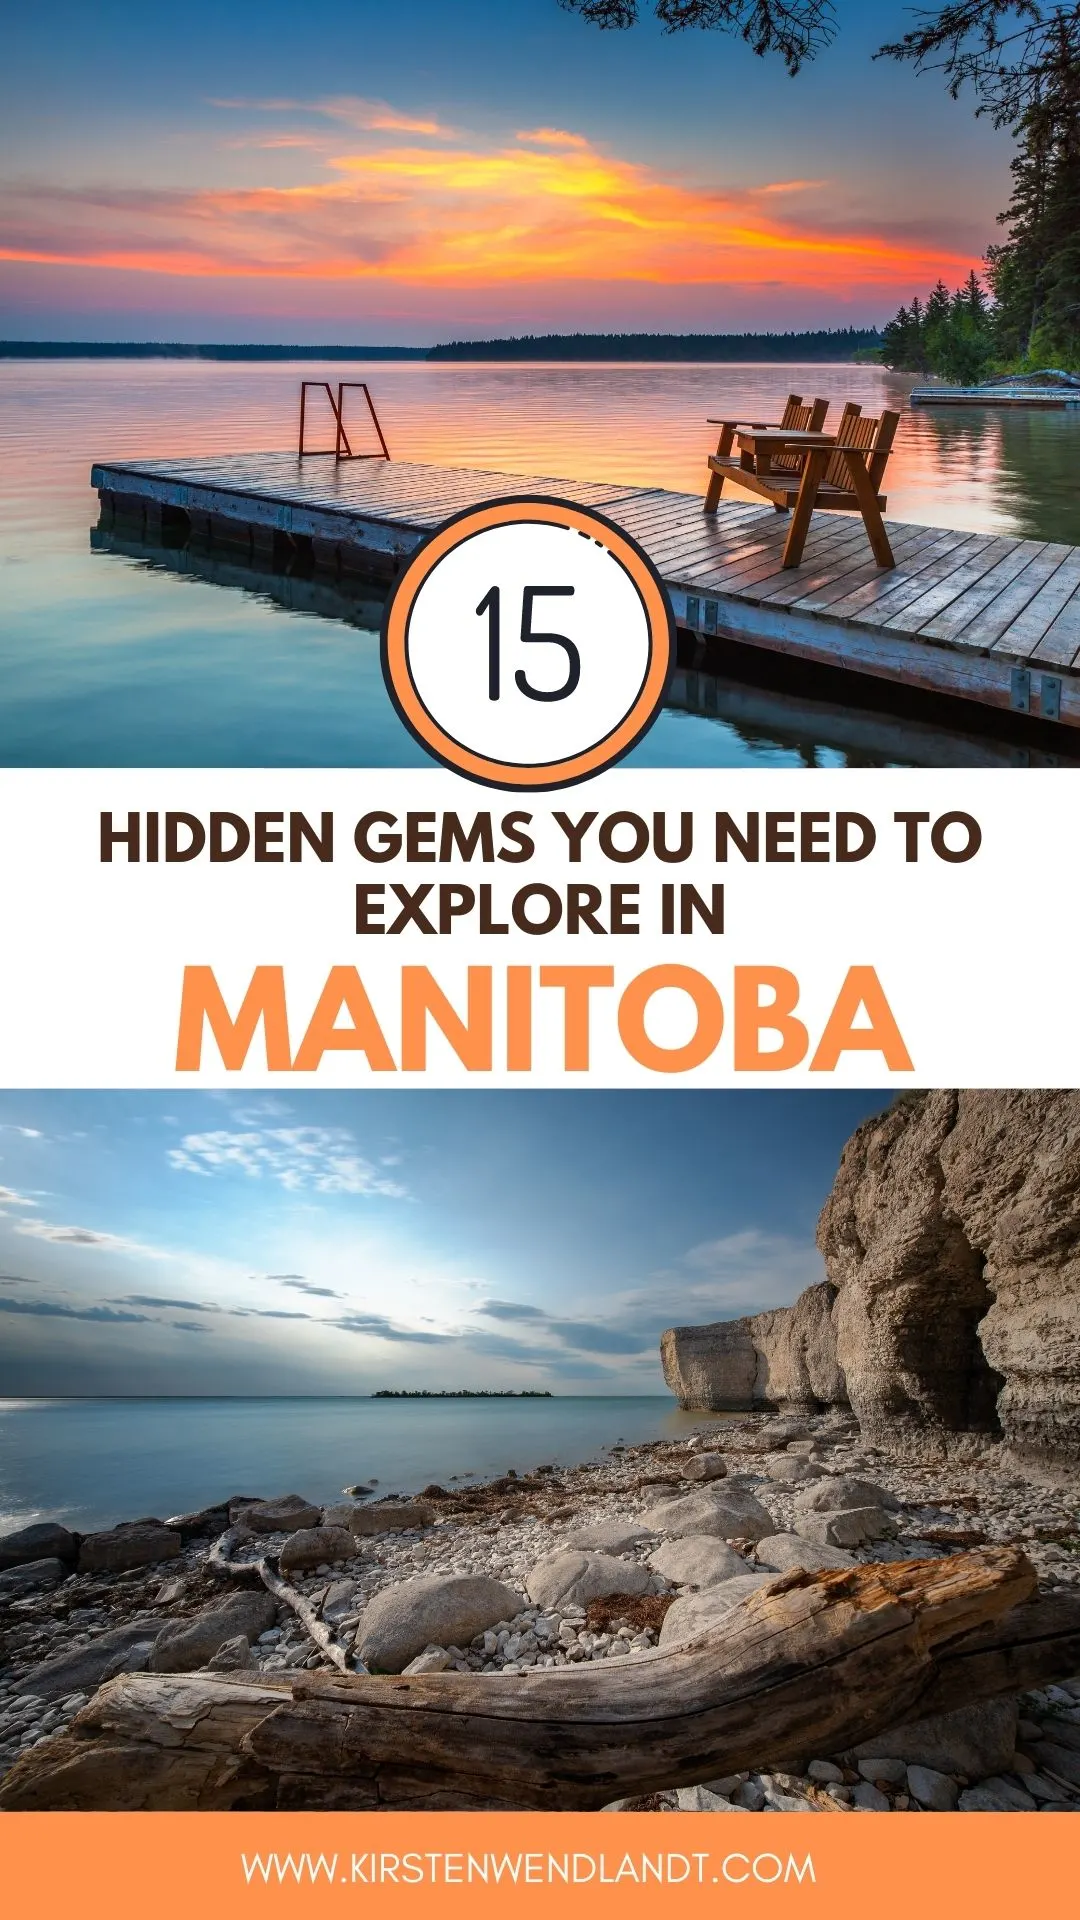 While some provinces in Canada get all the fame and are top of mind for people wanting to visit and explore more of Canada, Manitoba is not usually top of list. You'll soon find out though there are a ton of hidden gems in Manitoba! Manitoba it turns out, is such an incredible province with so much to explore. Here are 15 hidden gems in Manitoba you won't want to miss during your visit!